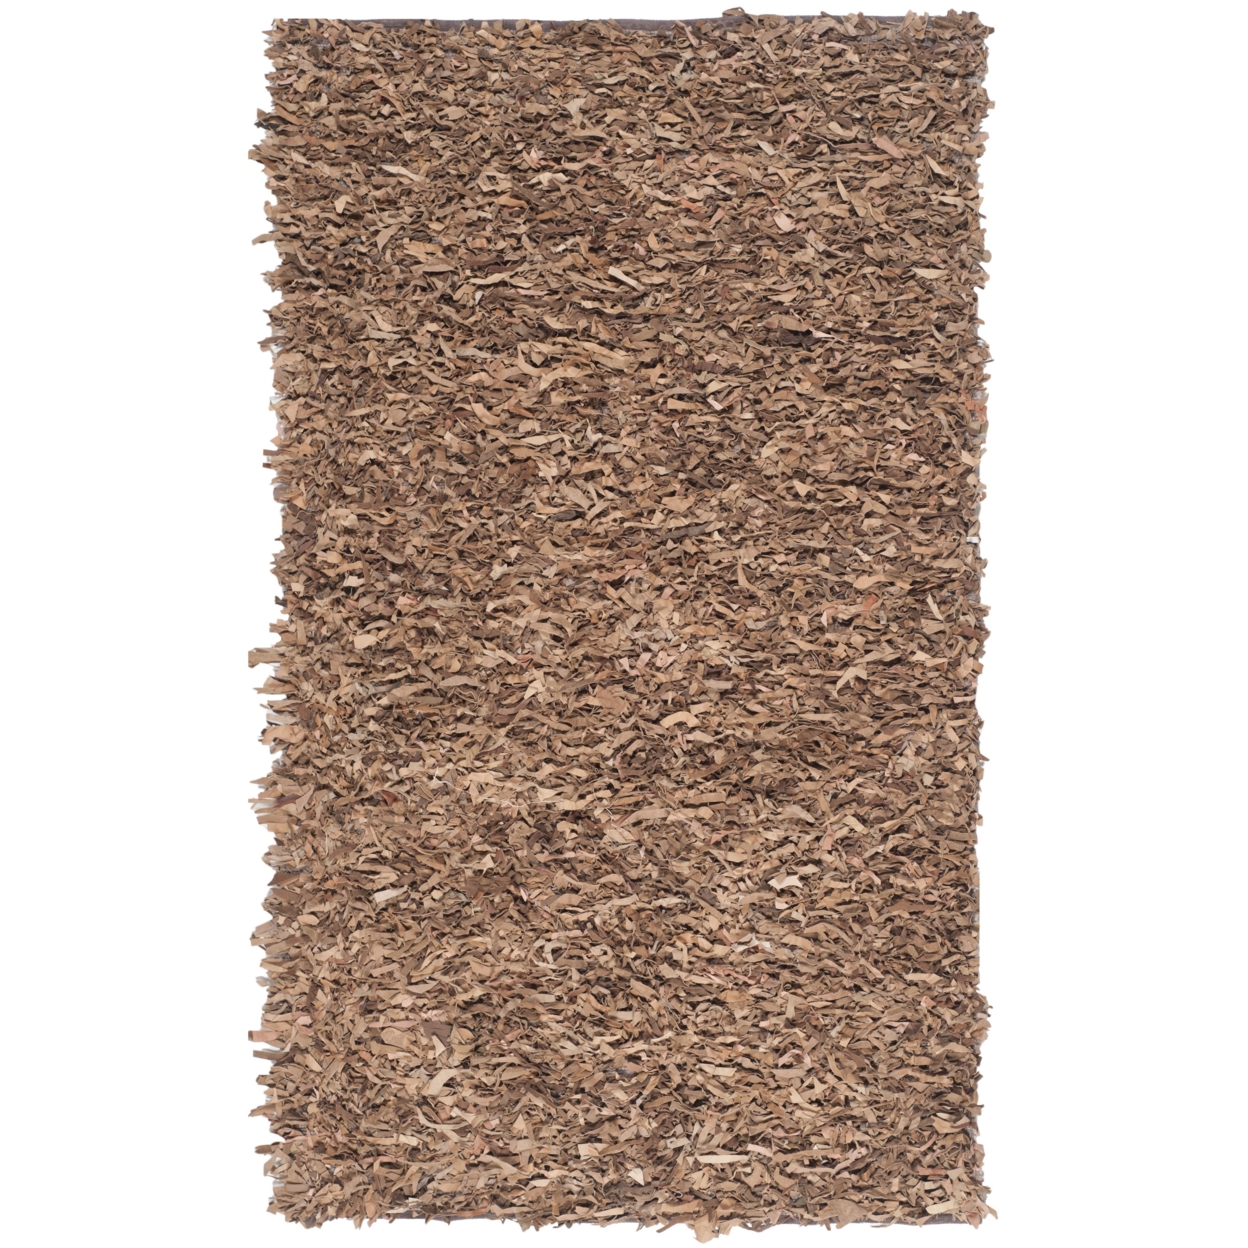 SAFAVIEH Leather Shag LSG511K Hand-knotted Brown Rug - 4' X 6'